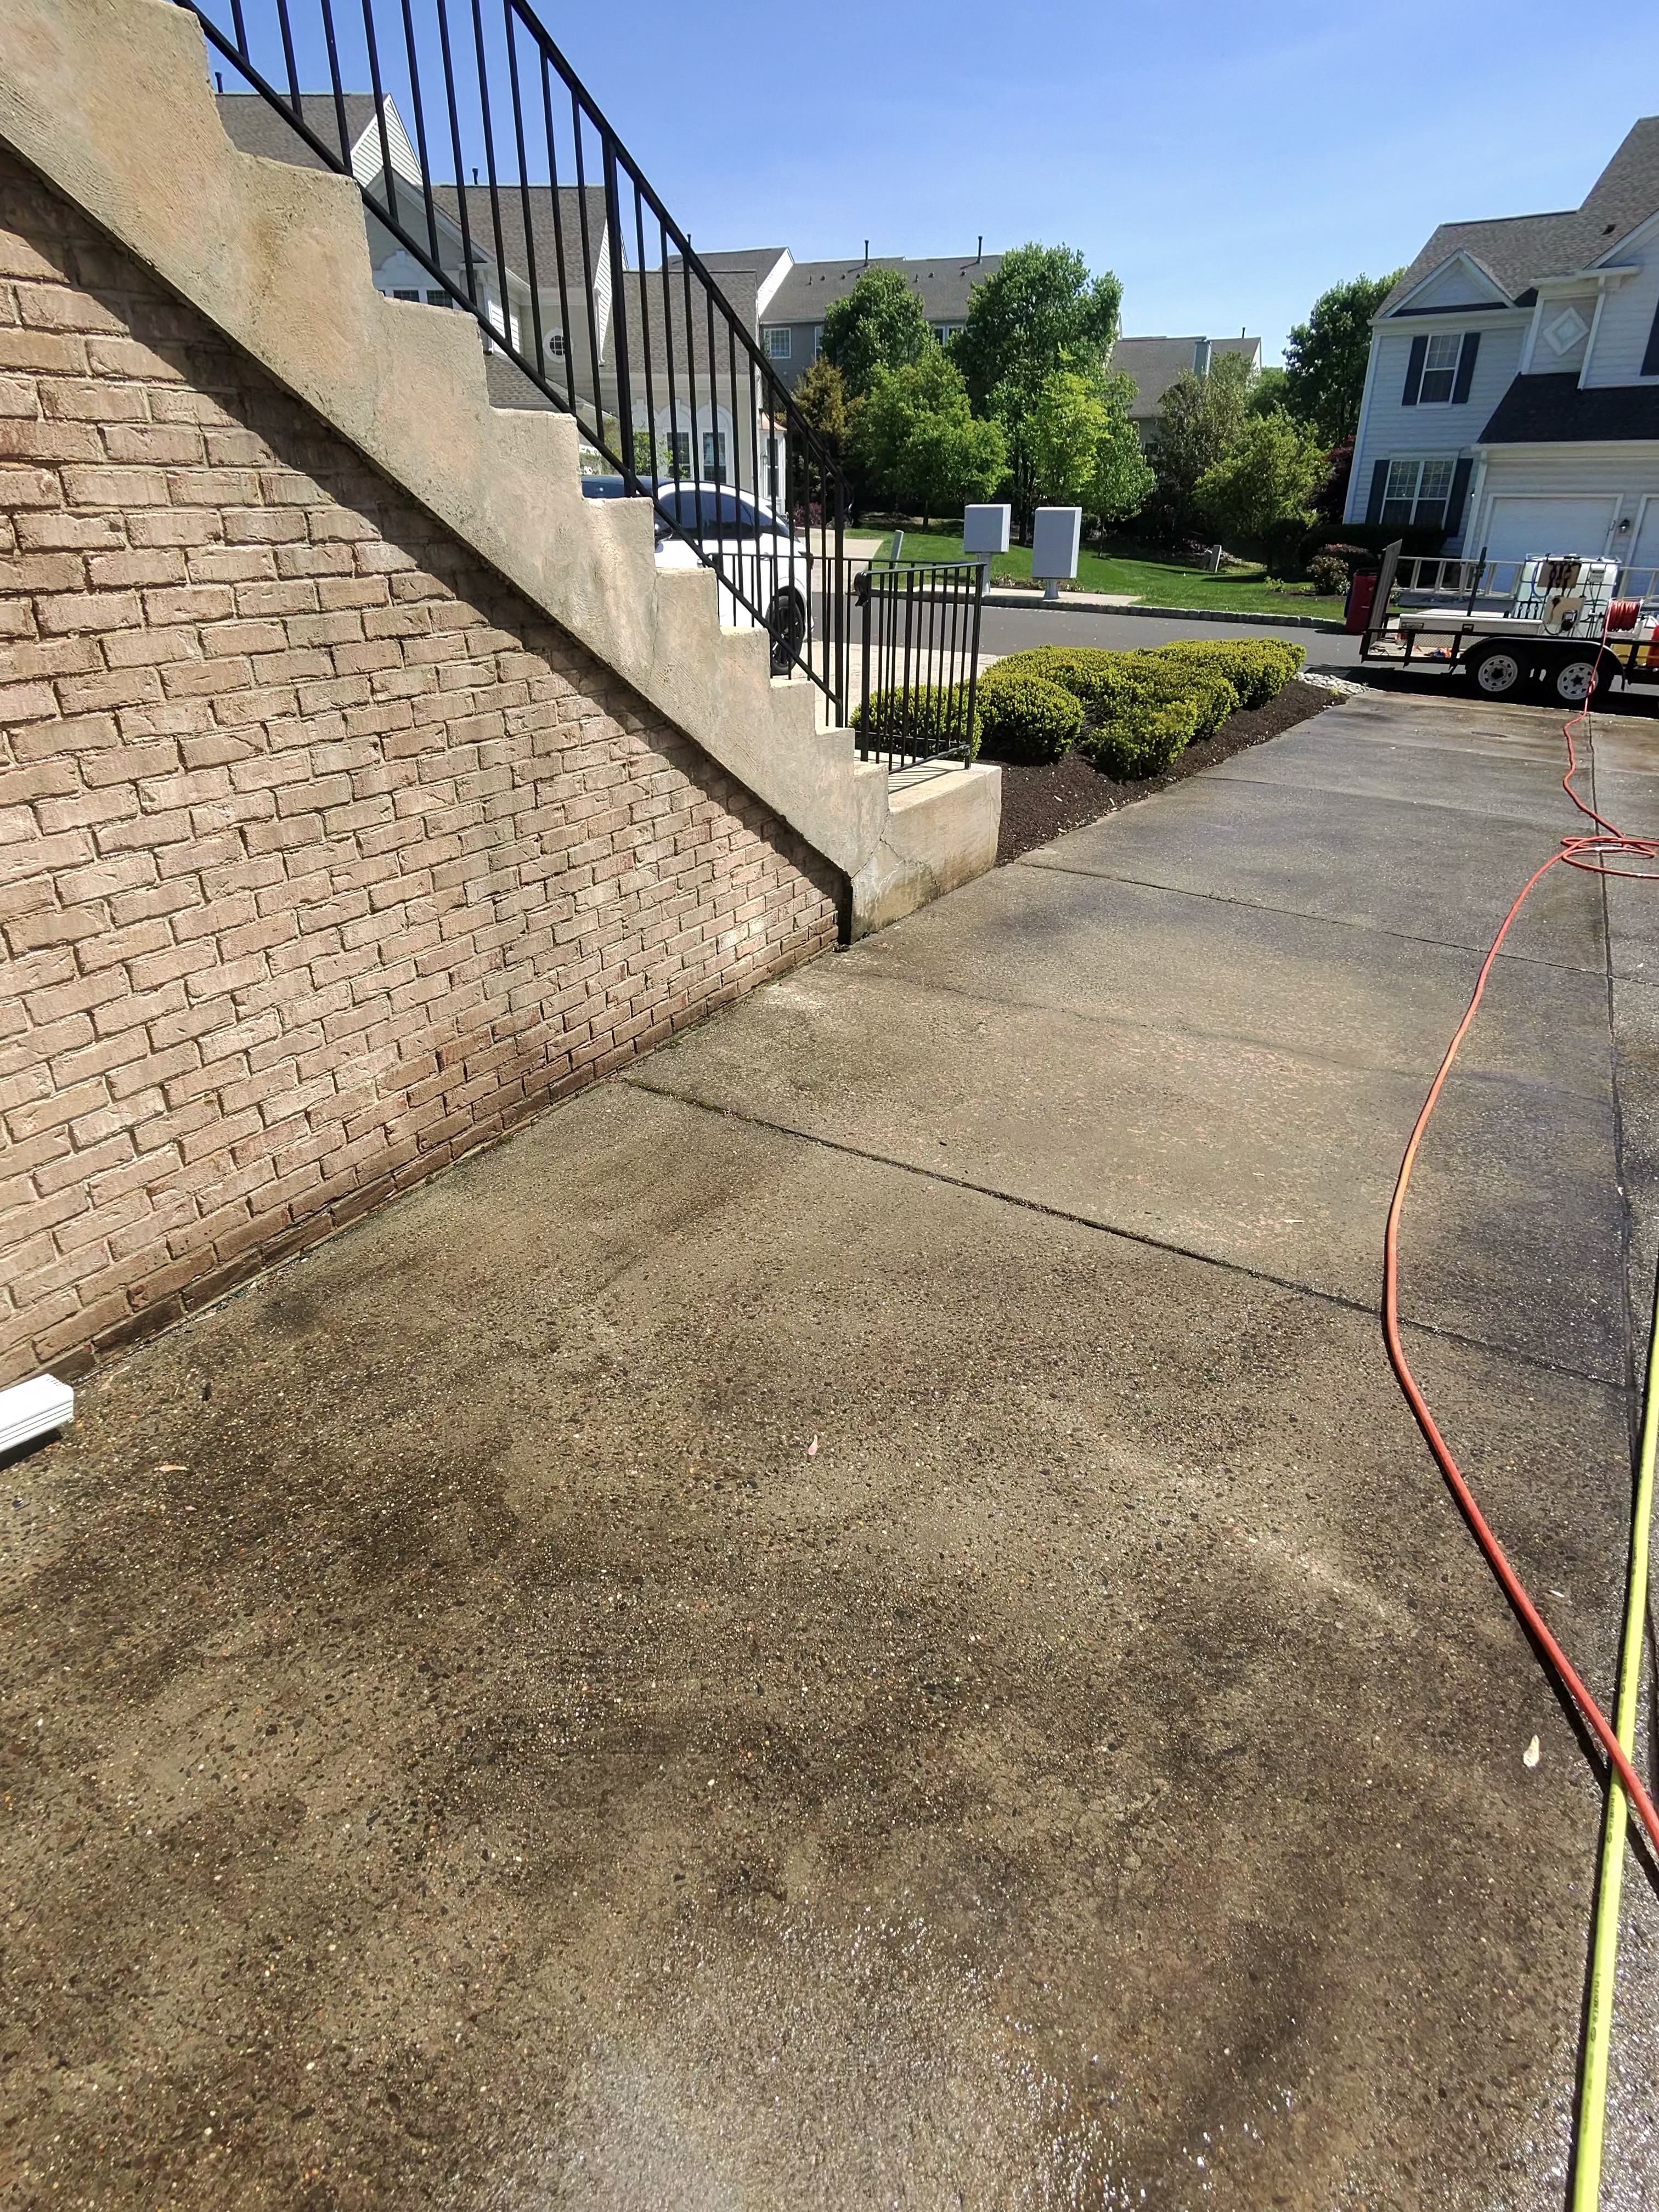 CONCRETE CLEANING IN DOYLESTOWN, PA